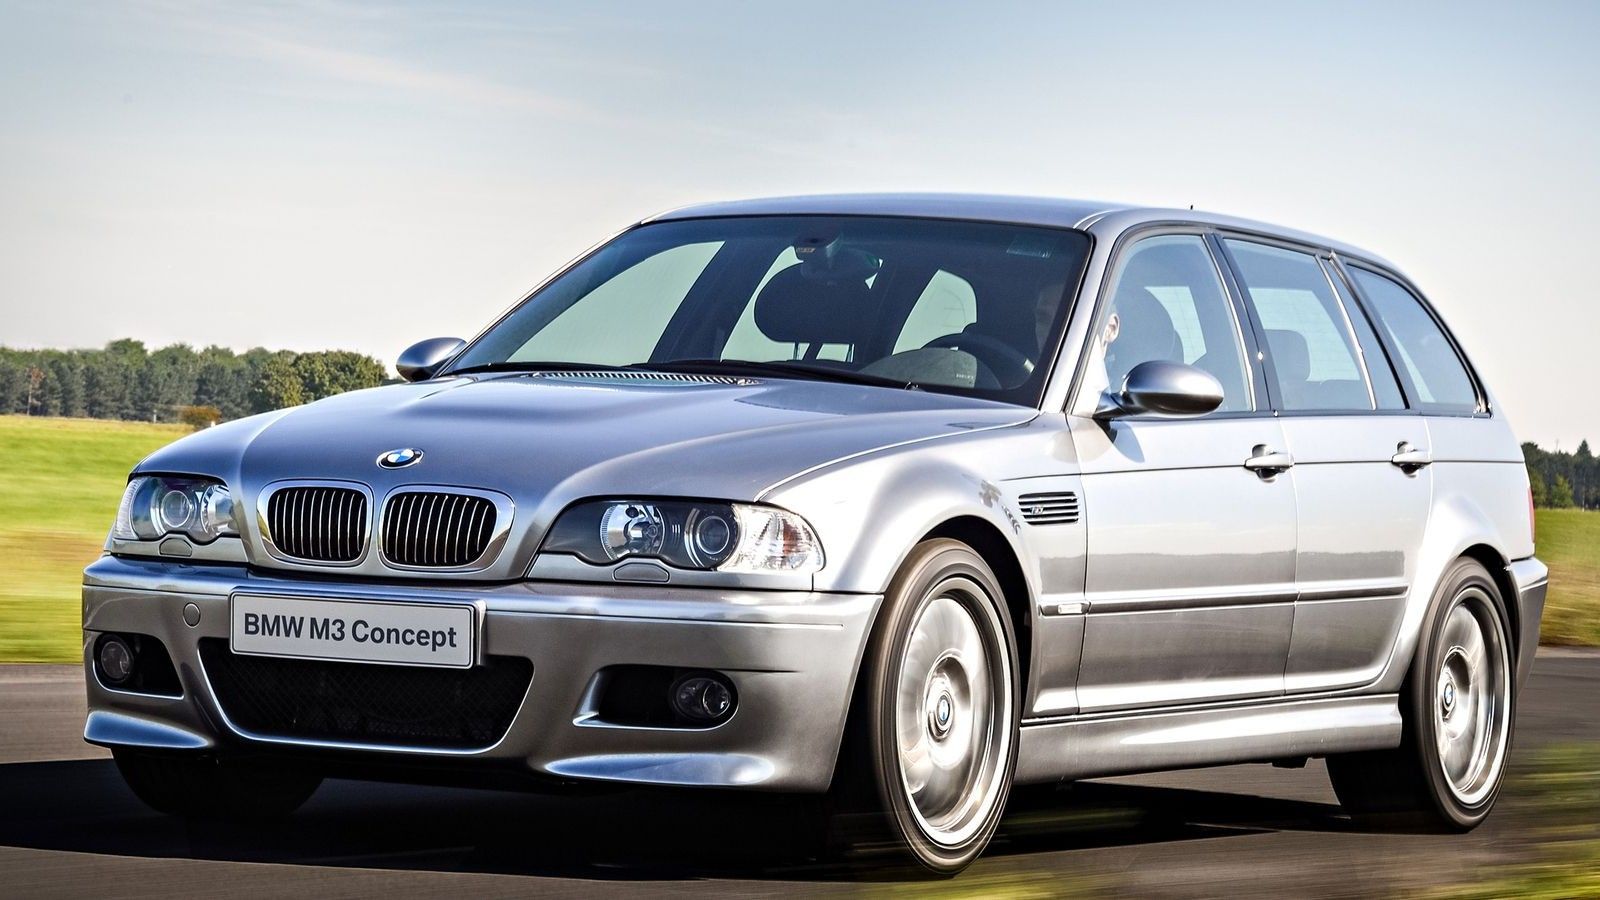 The Best Of Both Worlds: The Only E46 BMW M3 With A DCT And A V-10 Heart